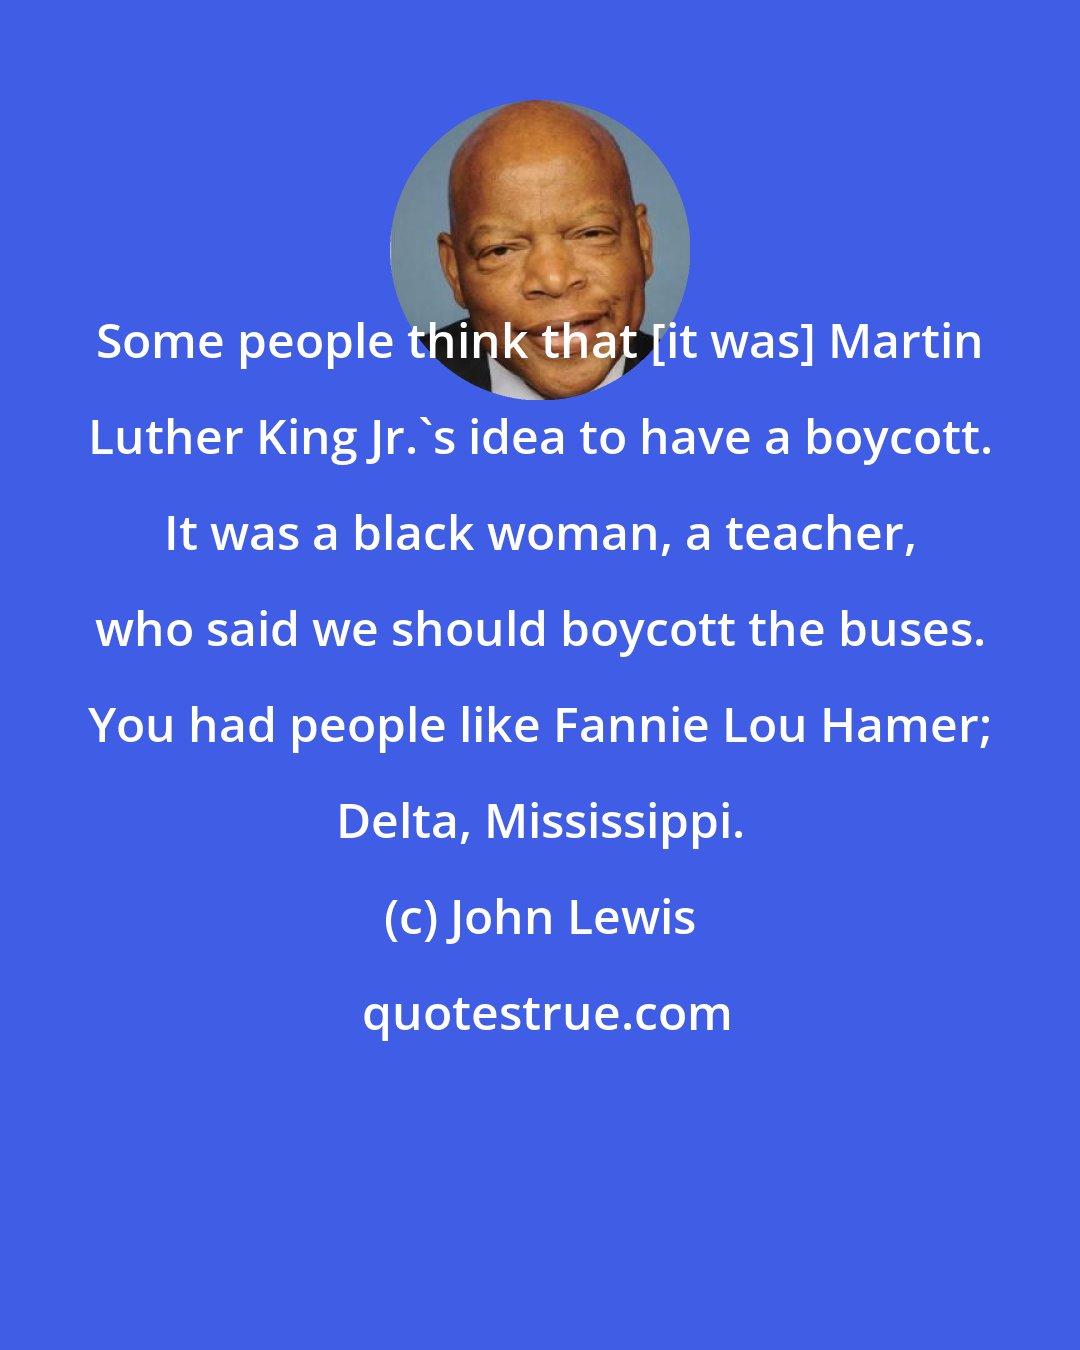 John Lewis: Some people think that [it was] Martin Luther King Jr.'s idea to have a boycott. It was a black woman, a teacher, who said we should boycott the buses. You had people like Fannie Lou Hamer; Delta, Mississippi.